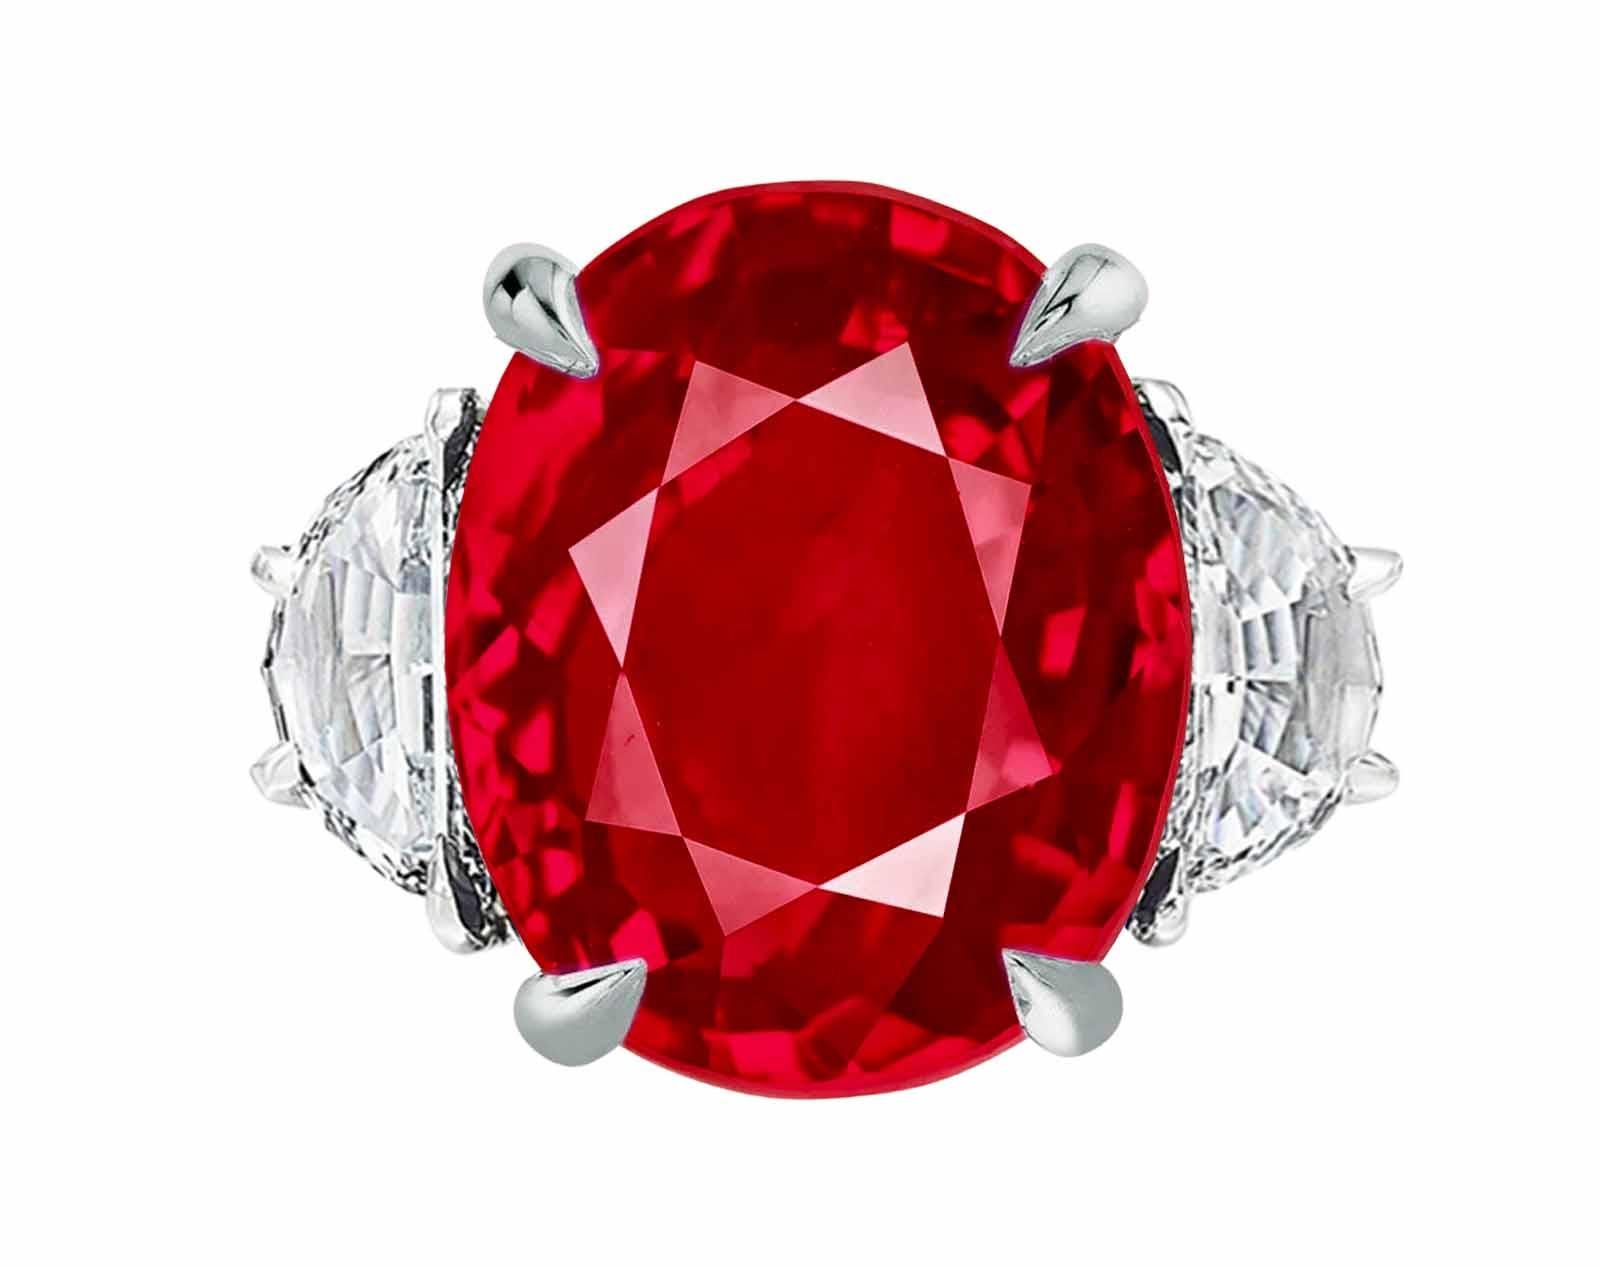 Oval Cut GIA Certified 3.50 Carat Red Oval Ruby Diamond Ring For Sale